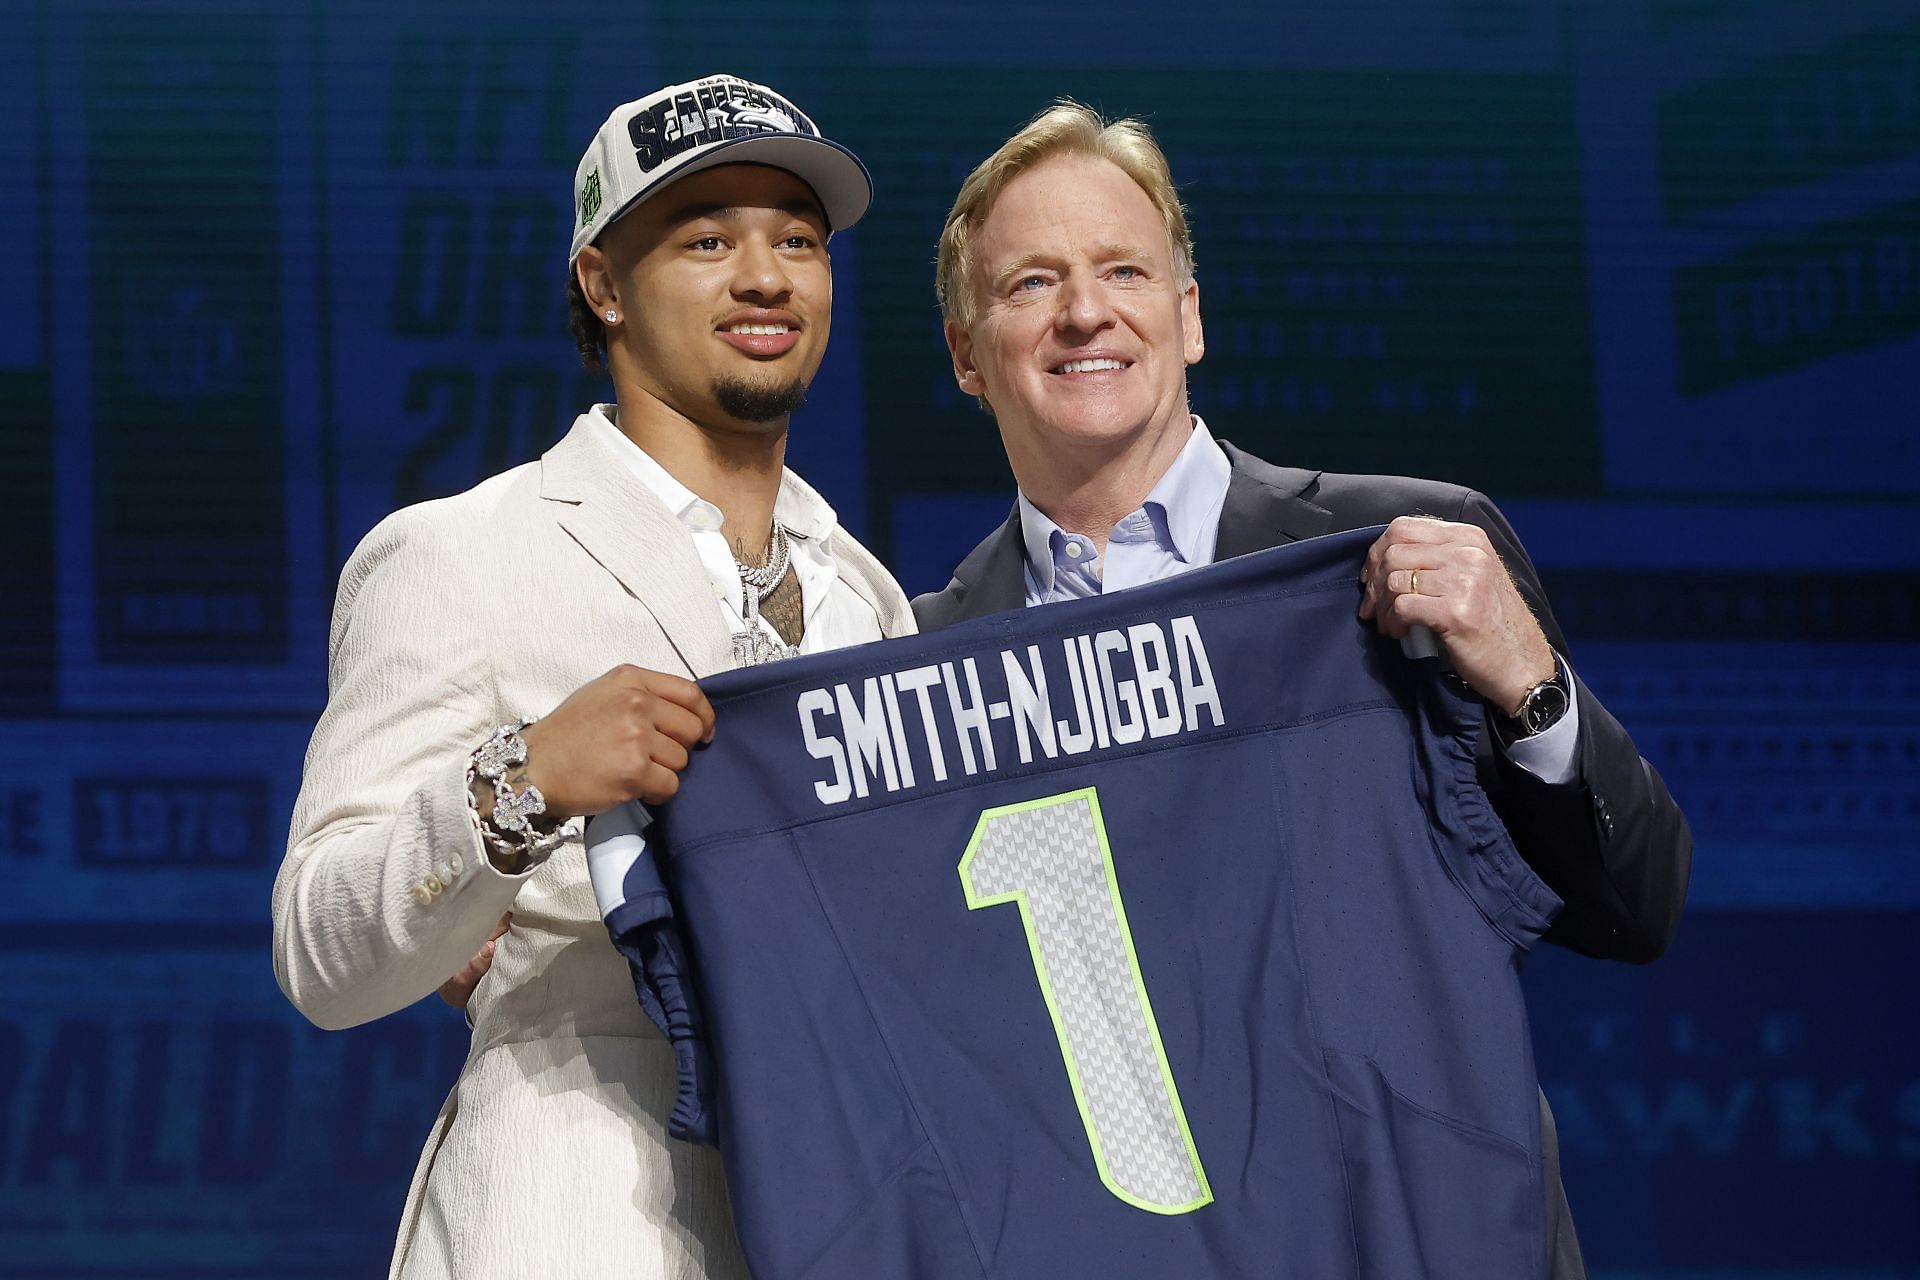 Jaxon Smith-Njigba poses with NFL Commissioner Roger Goodell after being selected 20th overall by the Seattle Seahawks 